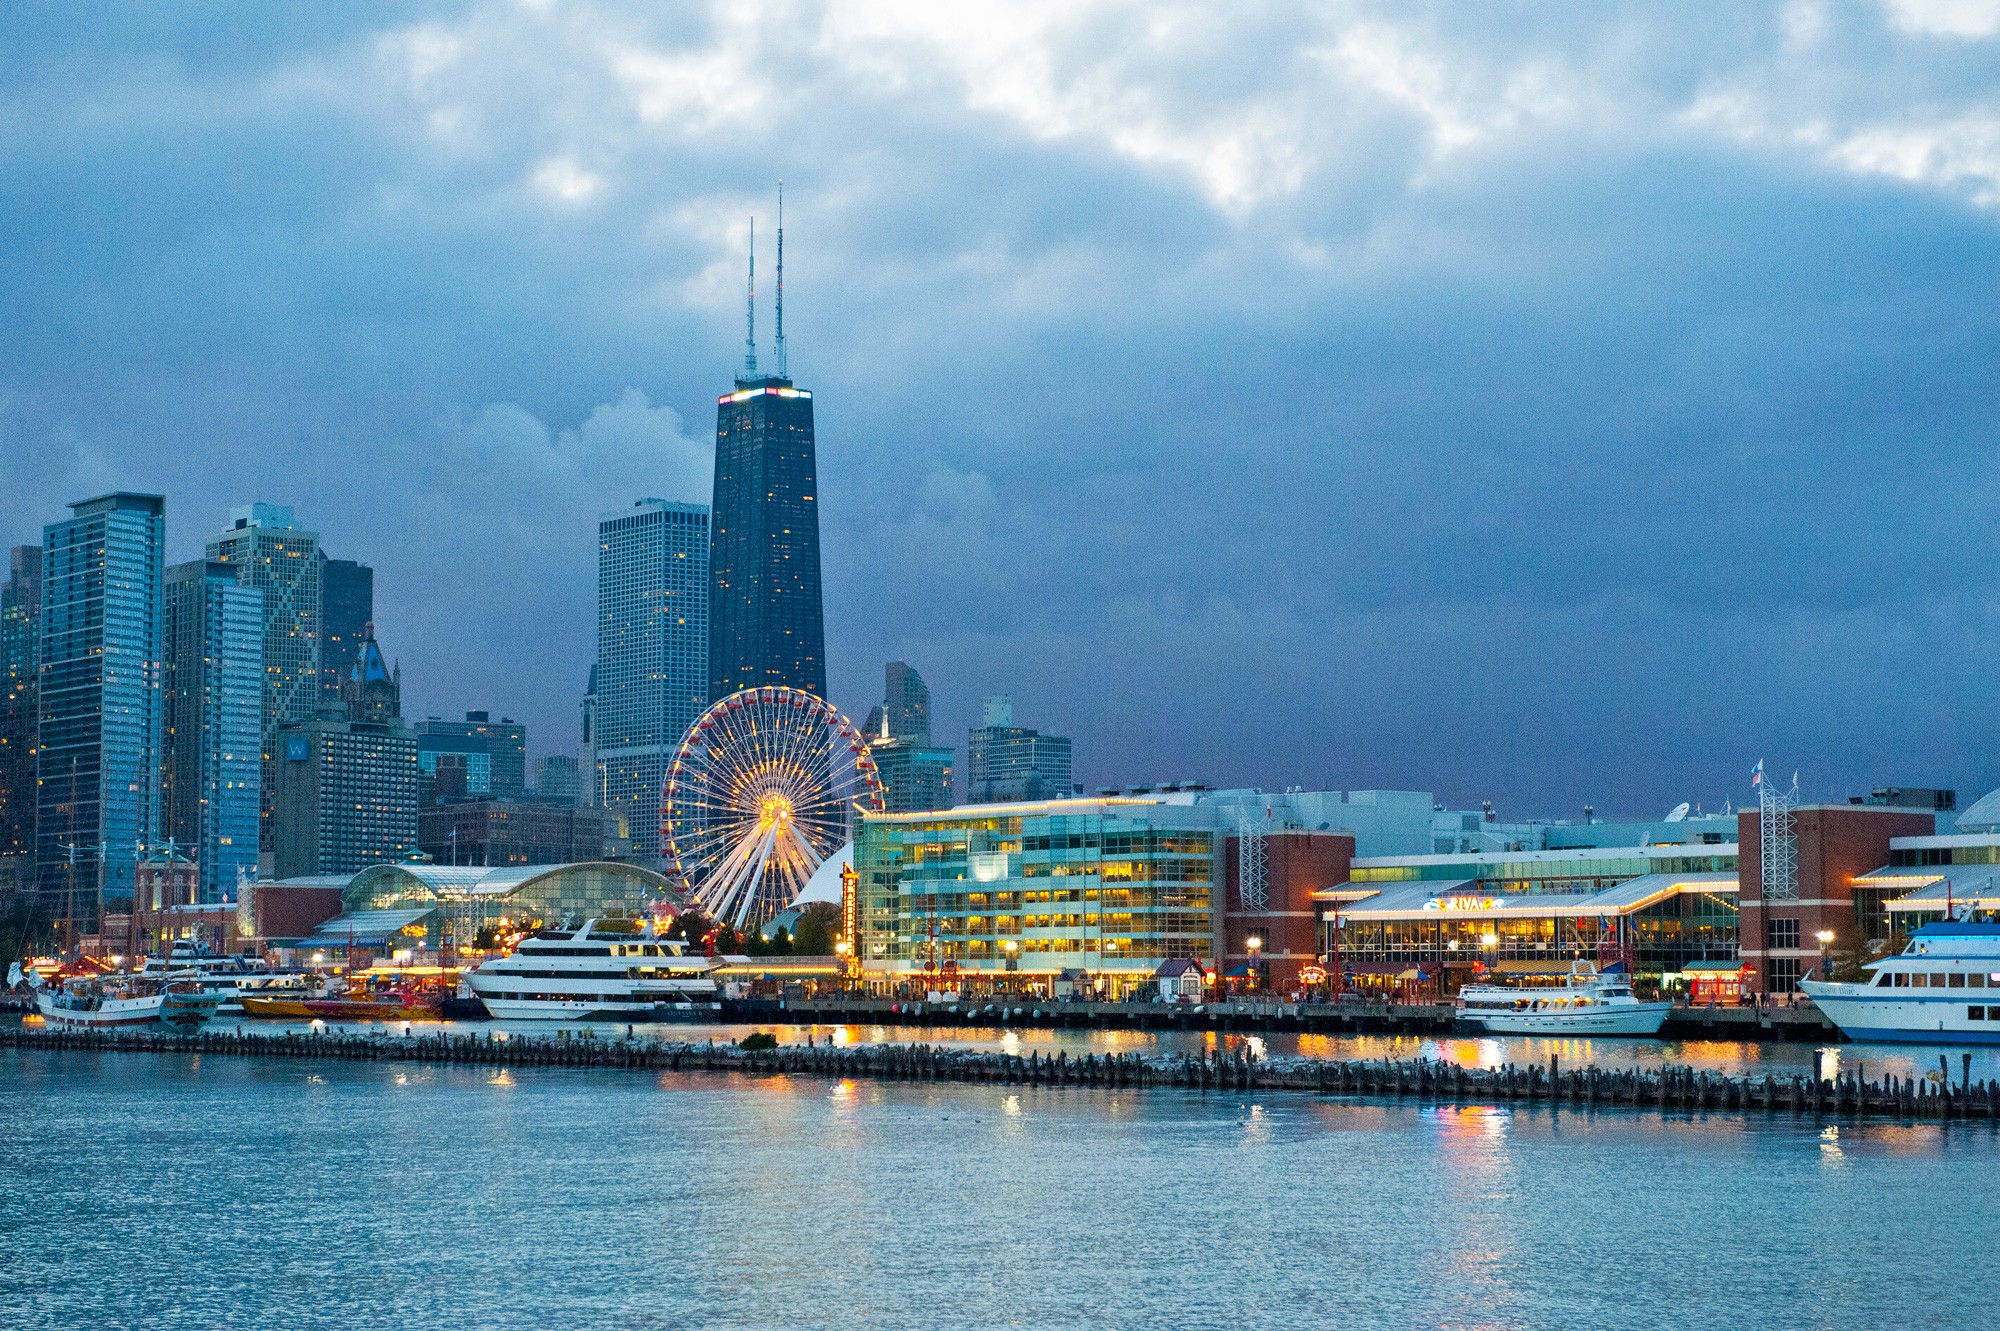 Navy Pier · Buildings of Chicago · Chicago Architecture Foundation - CAF